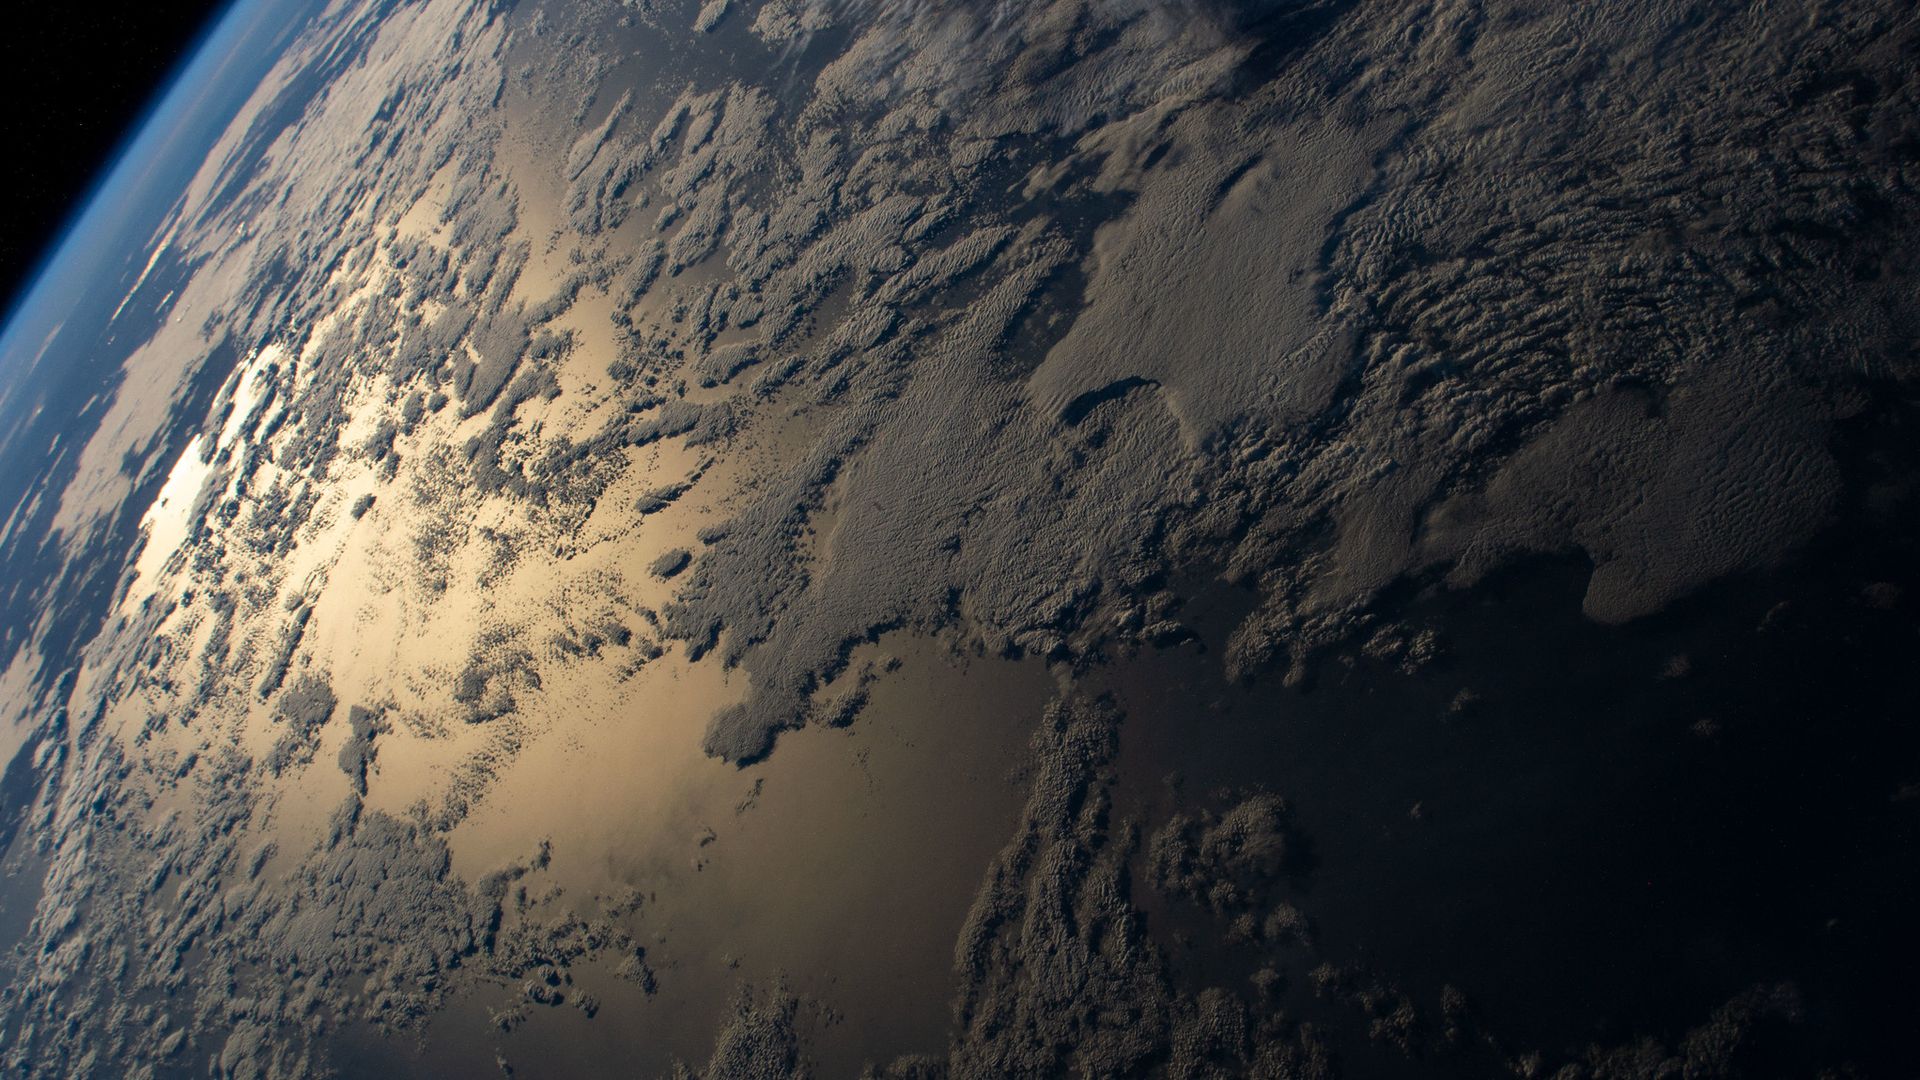 The sun glinting off of the ocean as seen from space